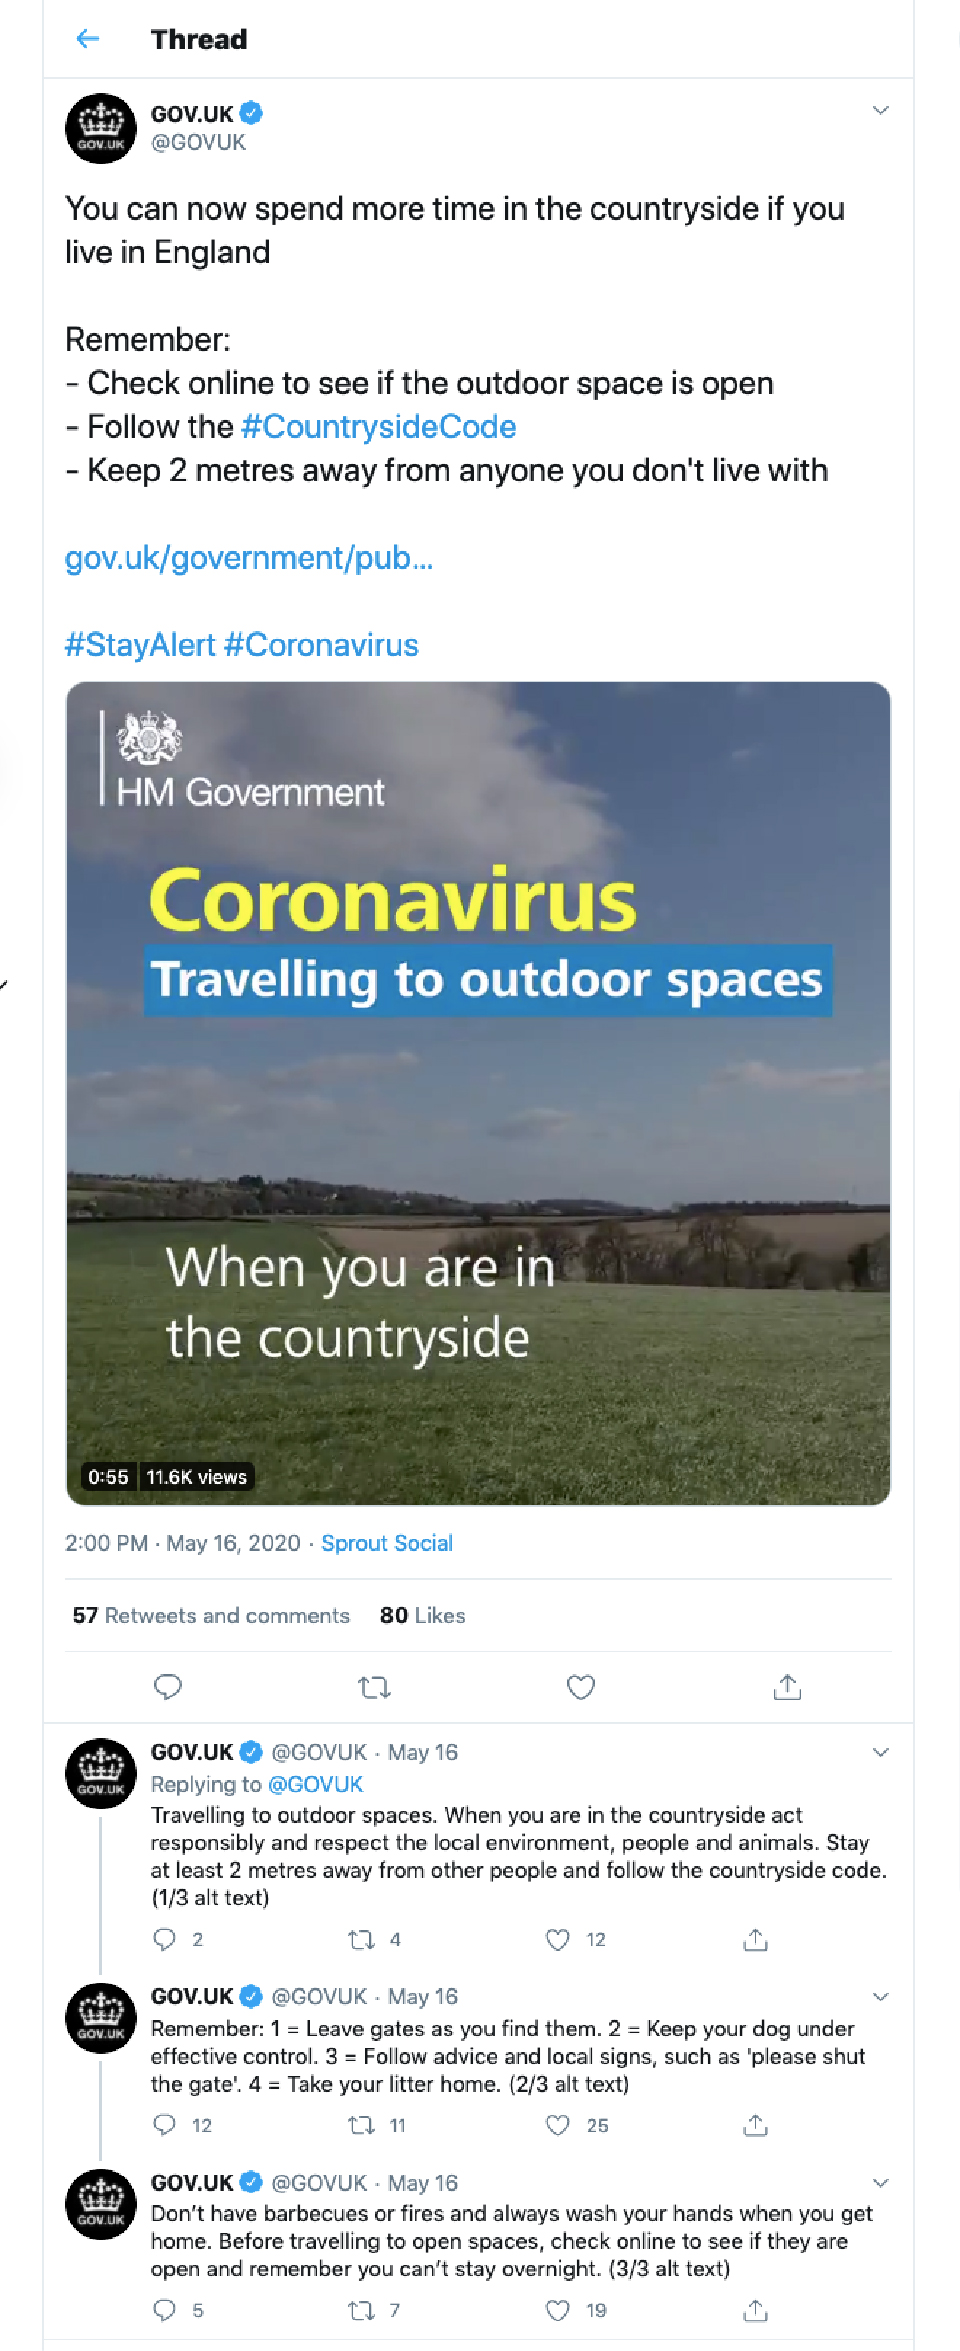 Twitter feed of the GOV.UK feed about COVID-19